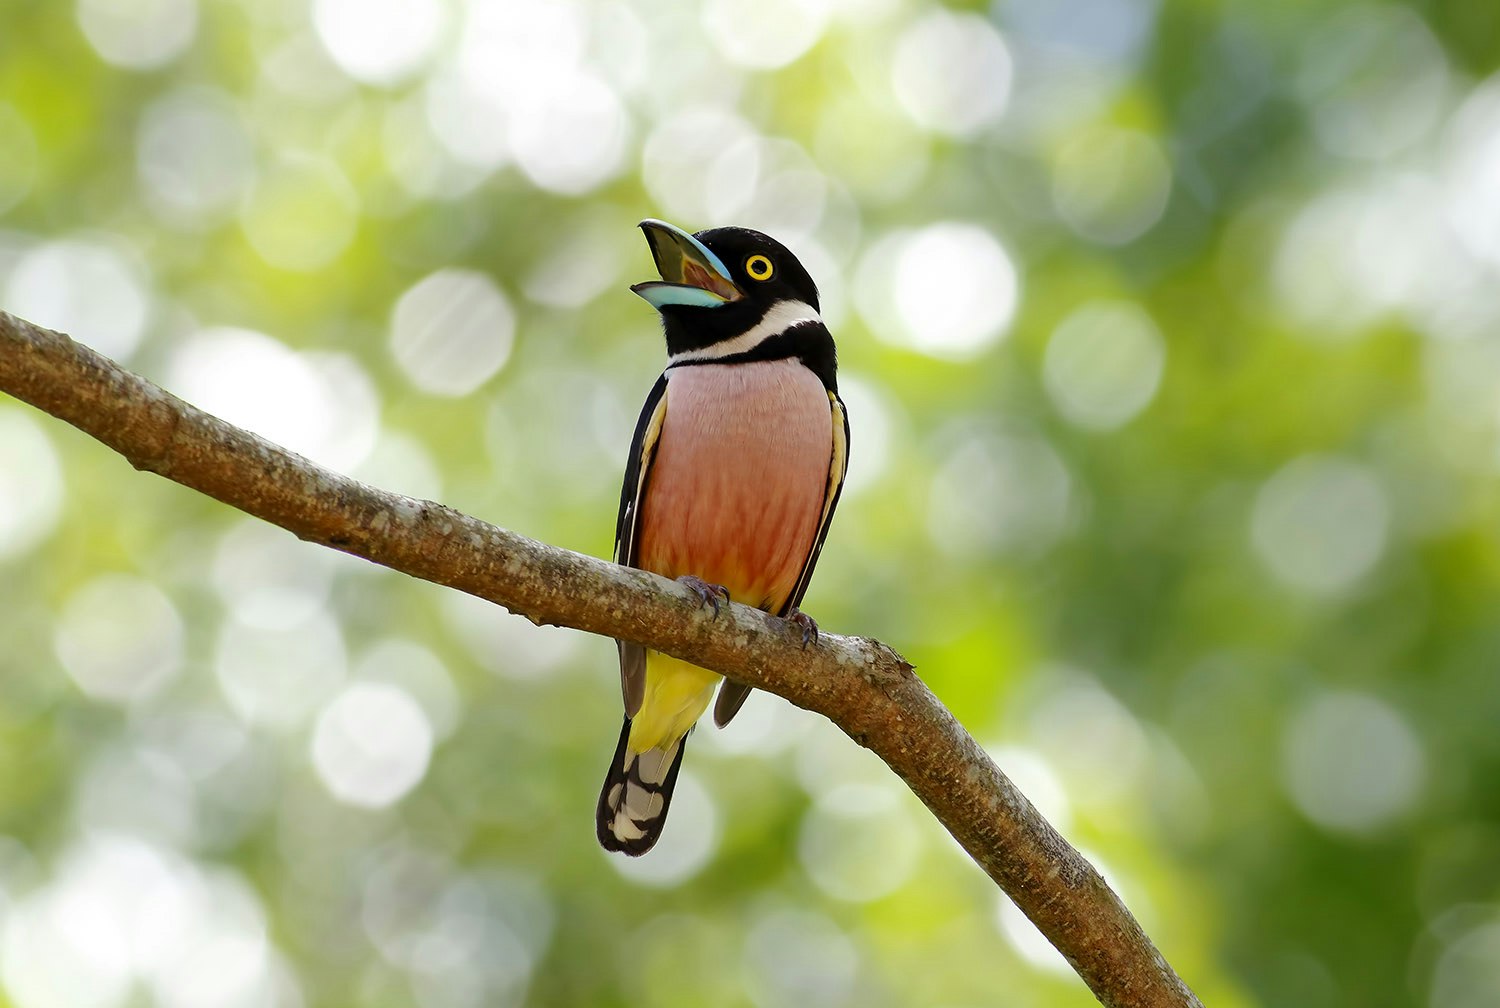 A black and yellow broadbill bird, brightly coloured in orange and yellow feather and a blue beak, sings from a narrow tree branch